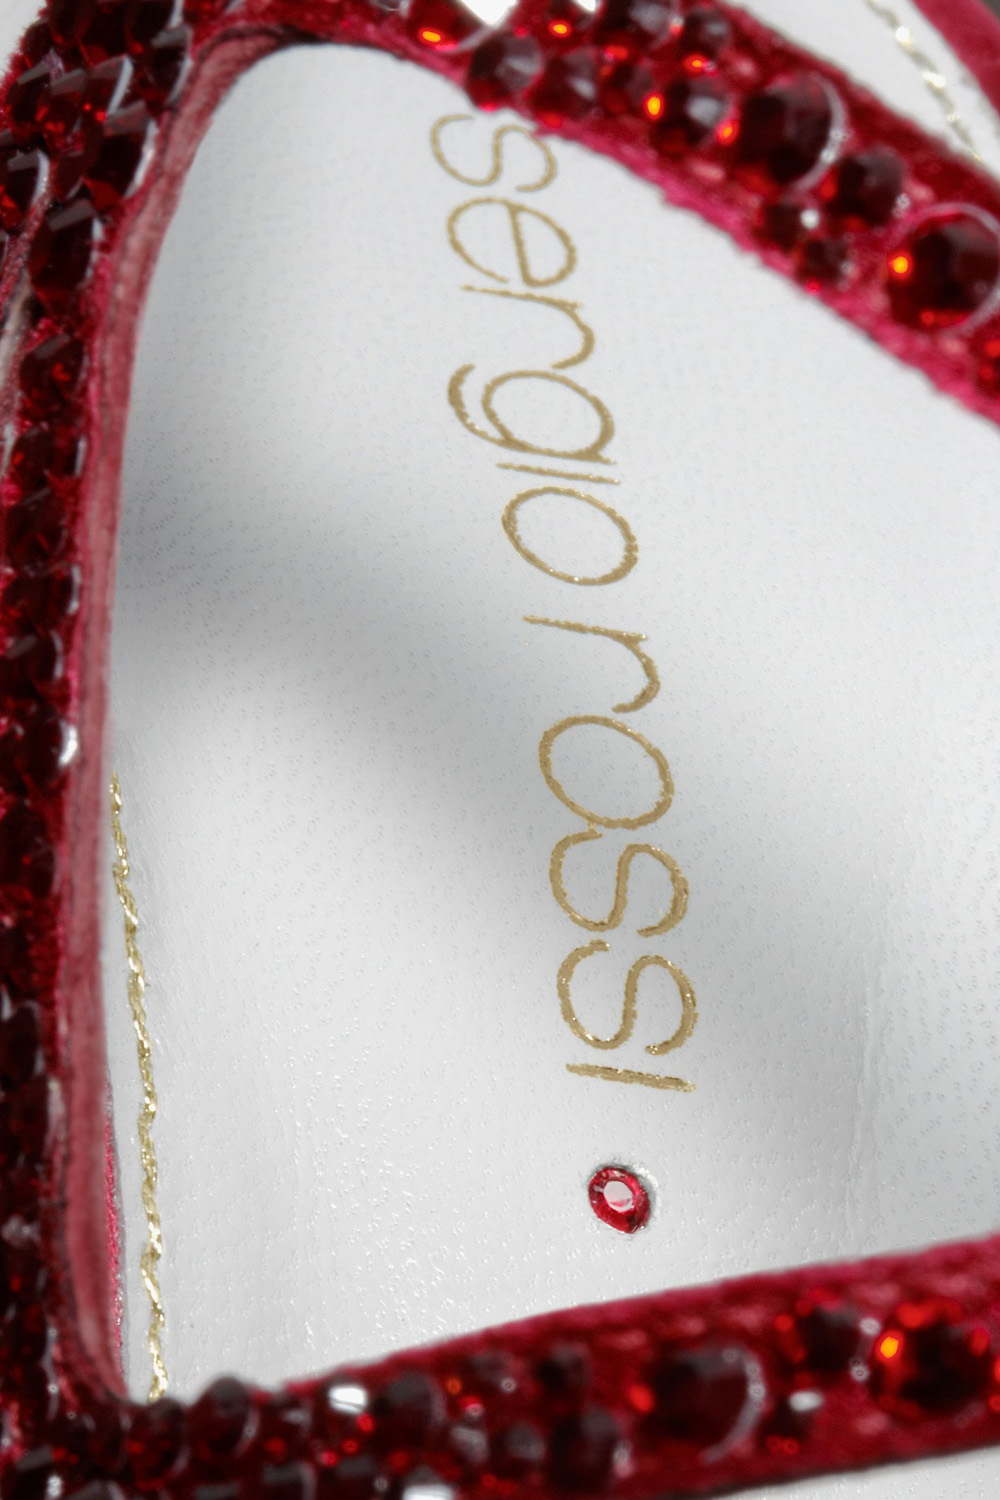 Sergio Rossi Red Carpet 2009 Limited Edition Debuts at Cannes Film Festival